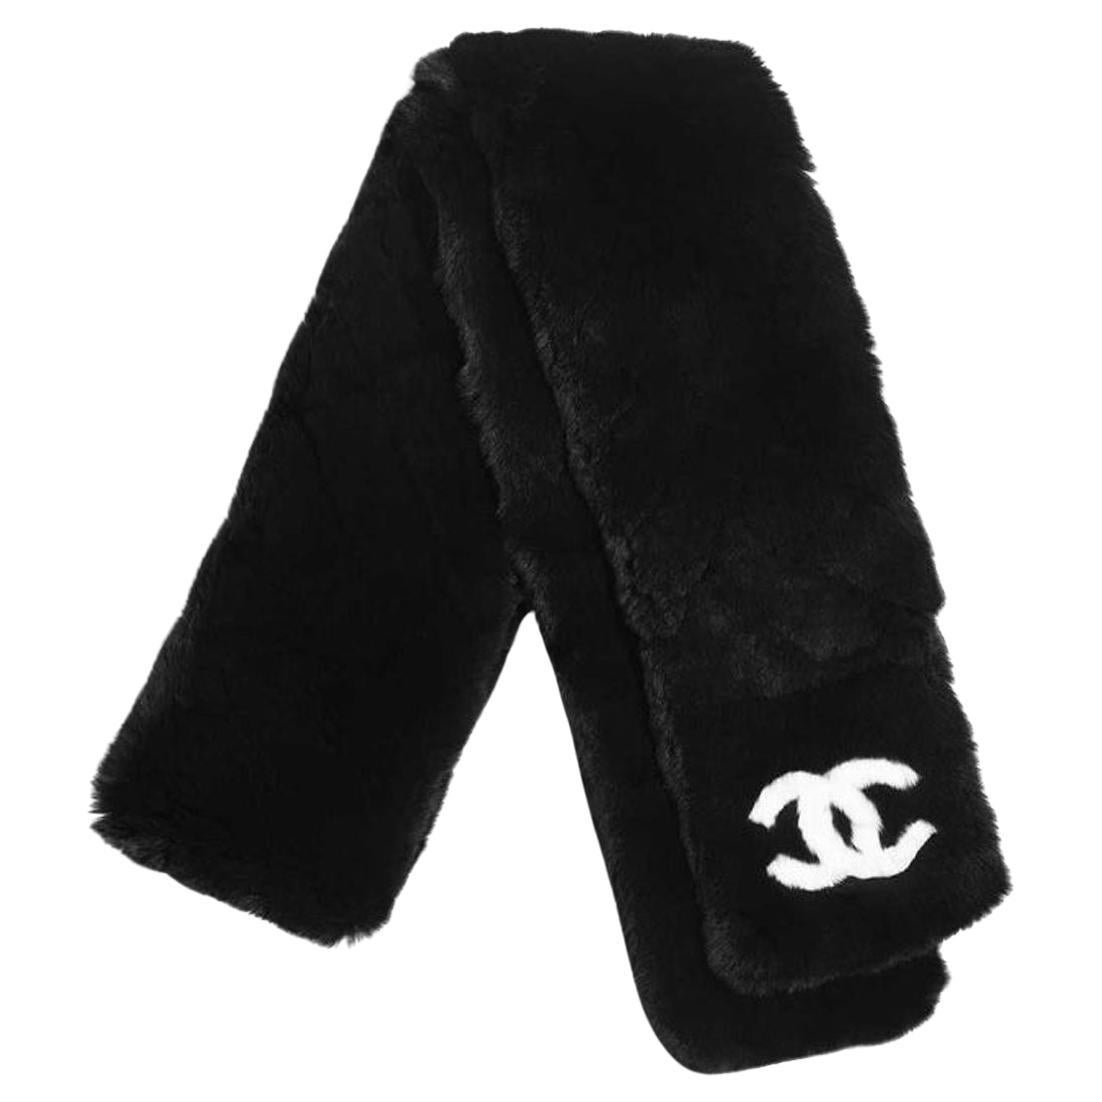 Chanel 2018 Fall CC Iconic Rare Winter Rabbit Fur Stole Scarf For Sale